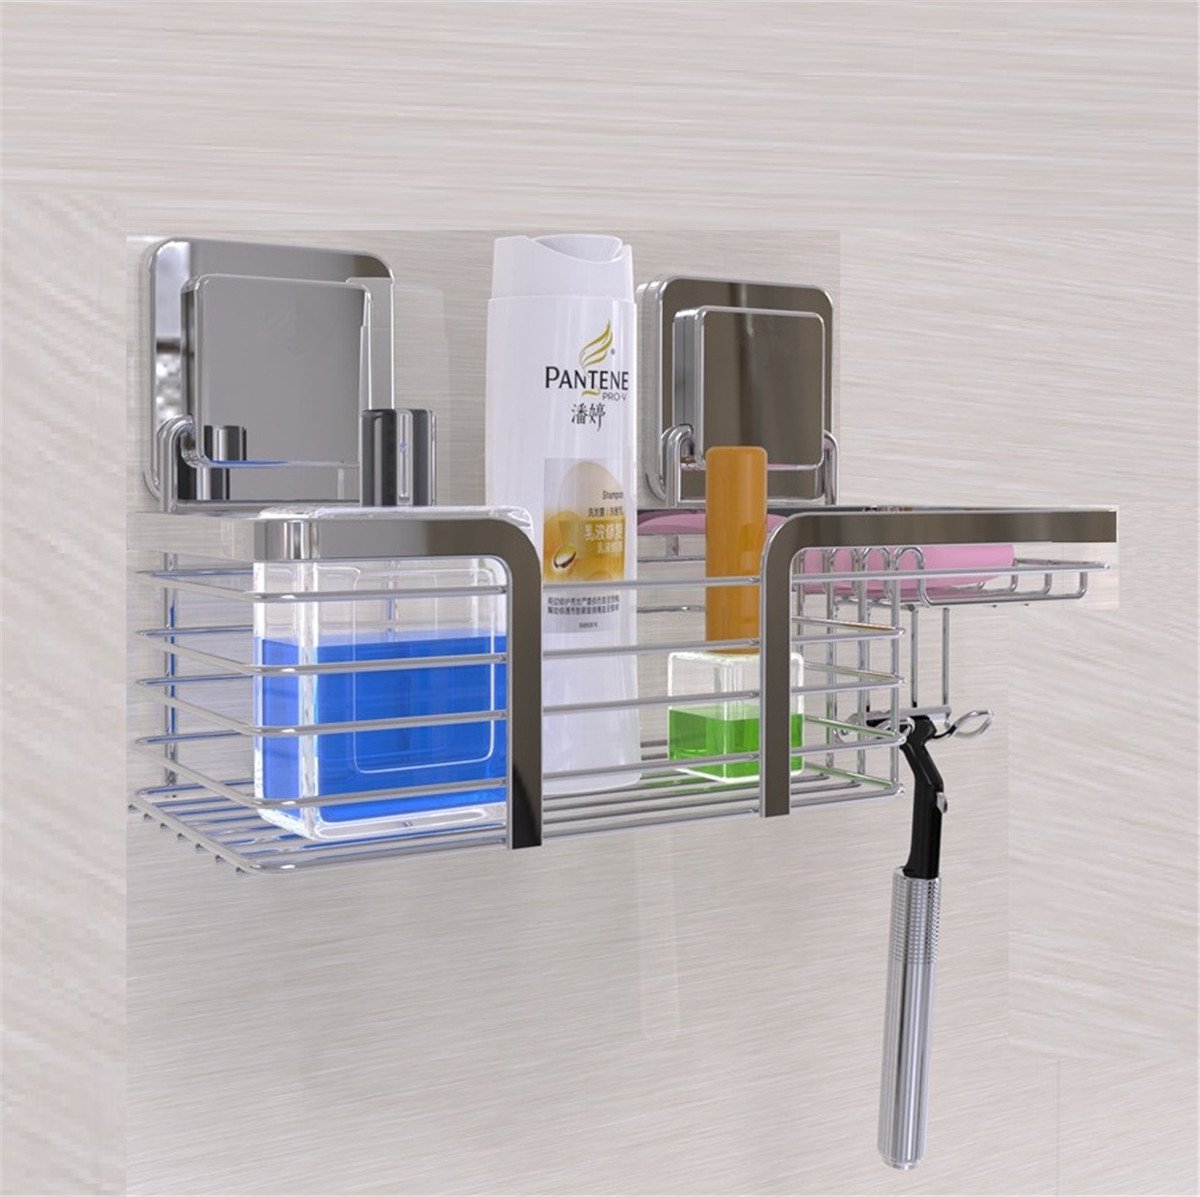 Shower Caddy Stainless Steel, Powerful Self Adhesive Shower Organizer Corner Basket Shelves with Soap Dishes Hooks for Kitchen Bathroom, No Drilling No Holes Bath Shampoo Holder(Shower Caddy)